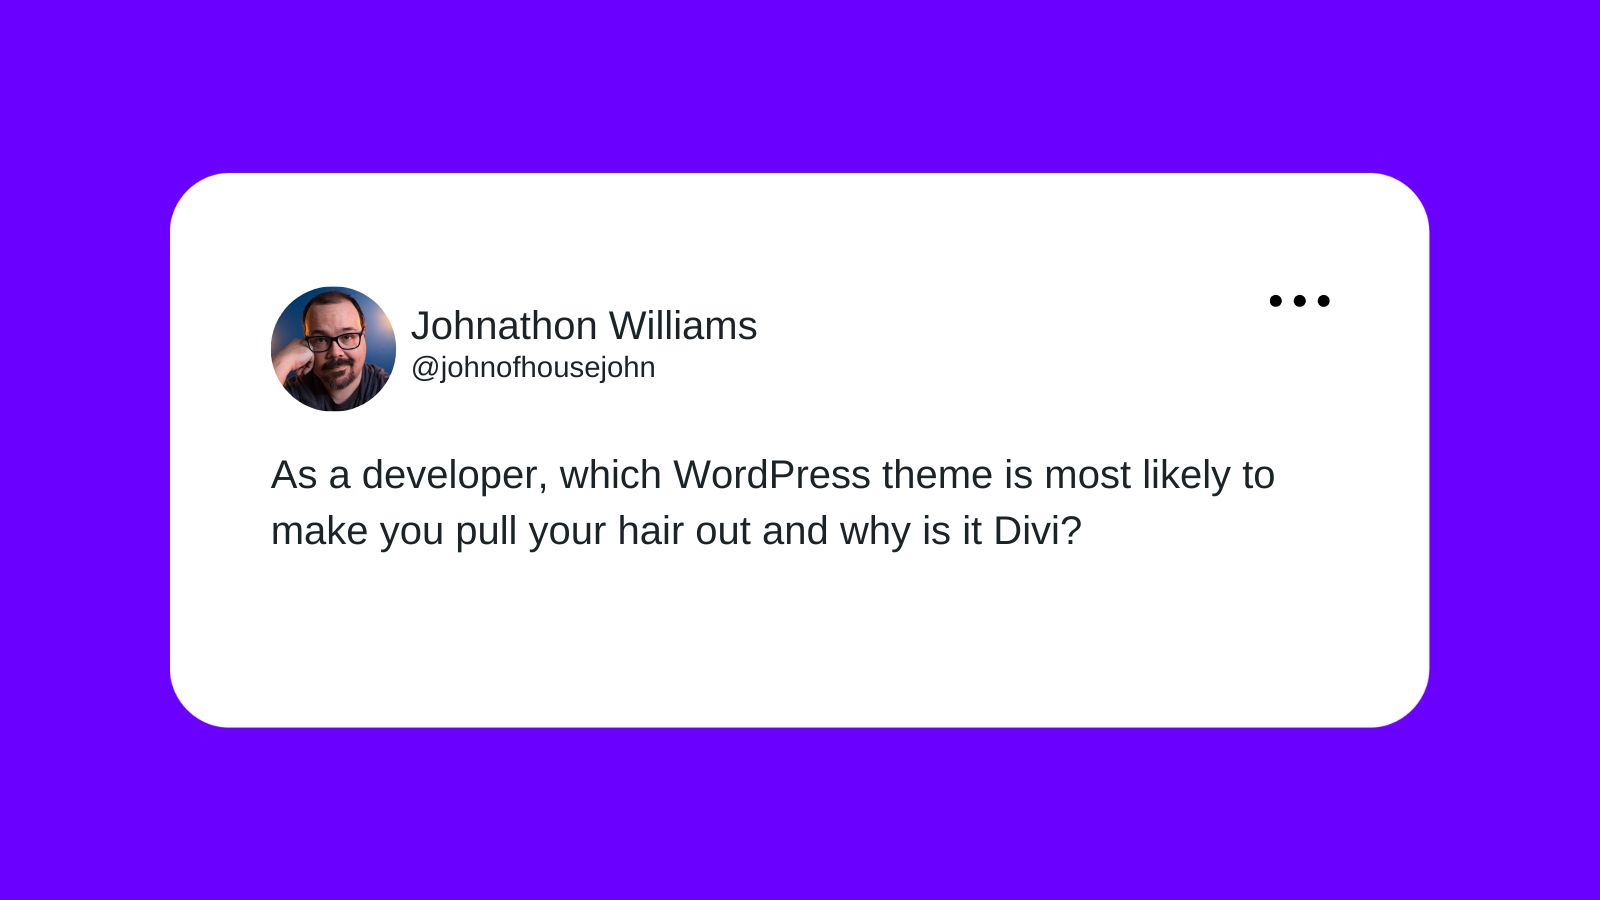 Johnathon Williams tweeting "As a developer, which WordPress theme is most likely to make you pull your heart out and why is it Divi?"